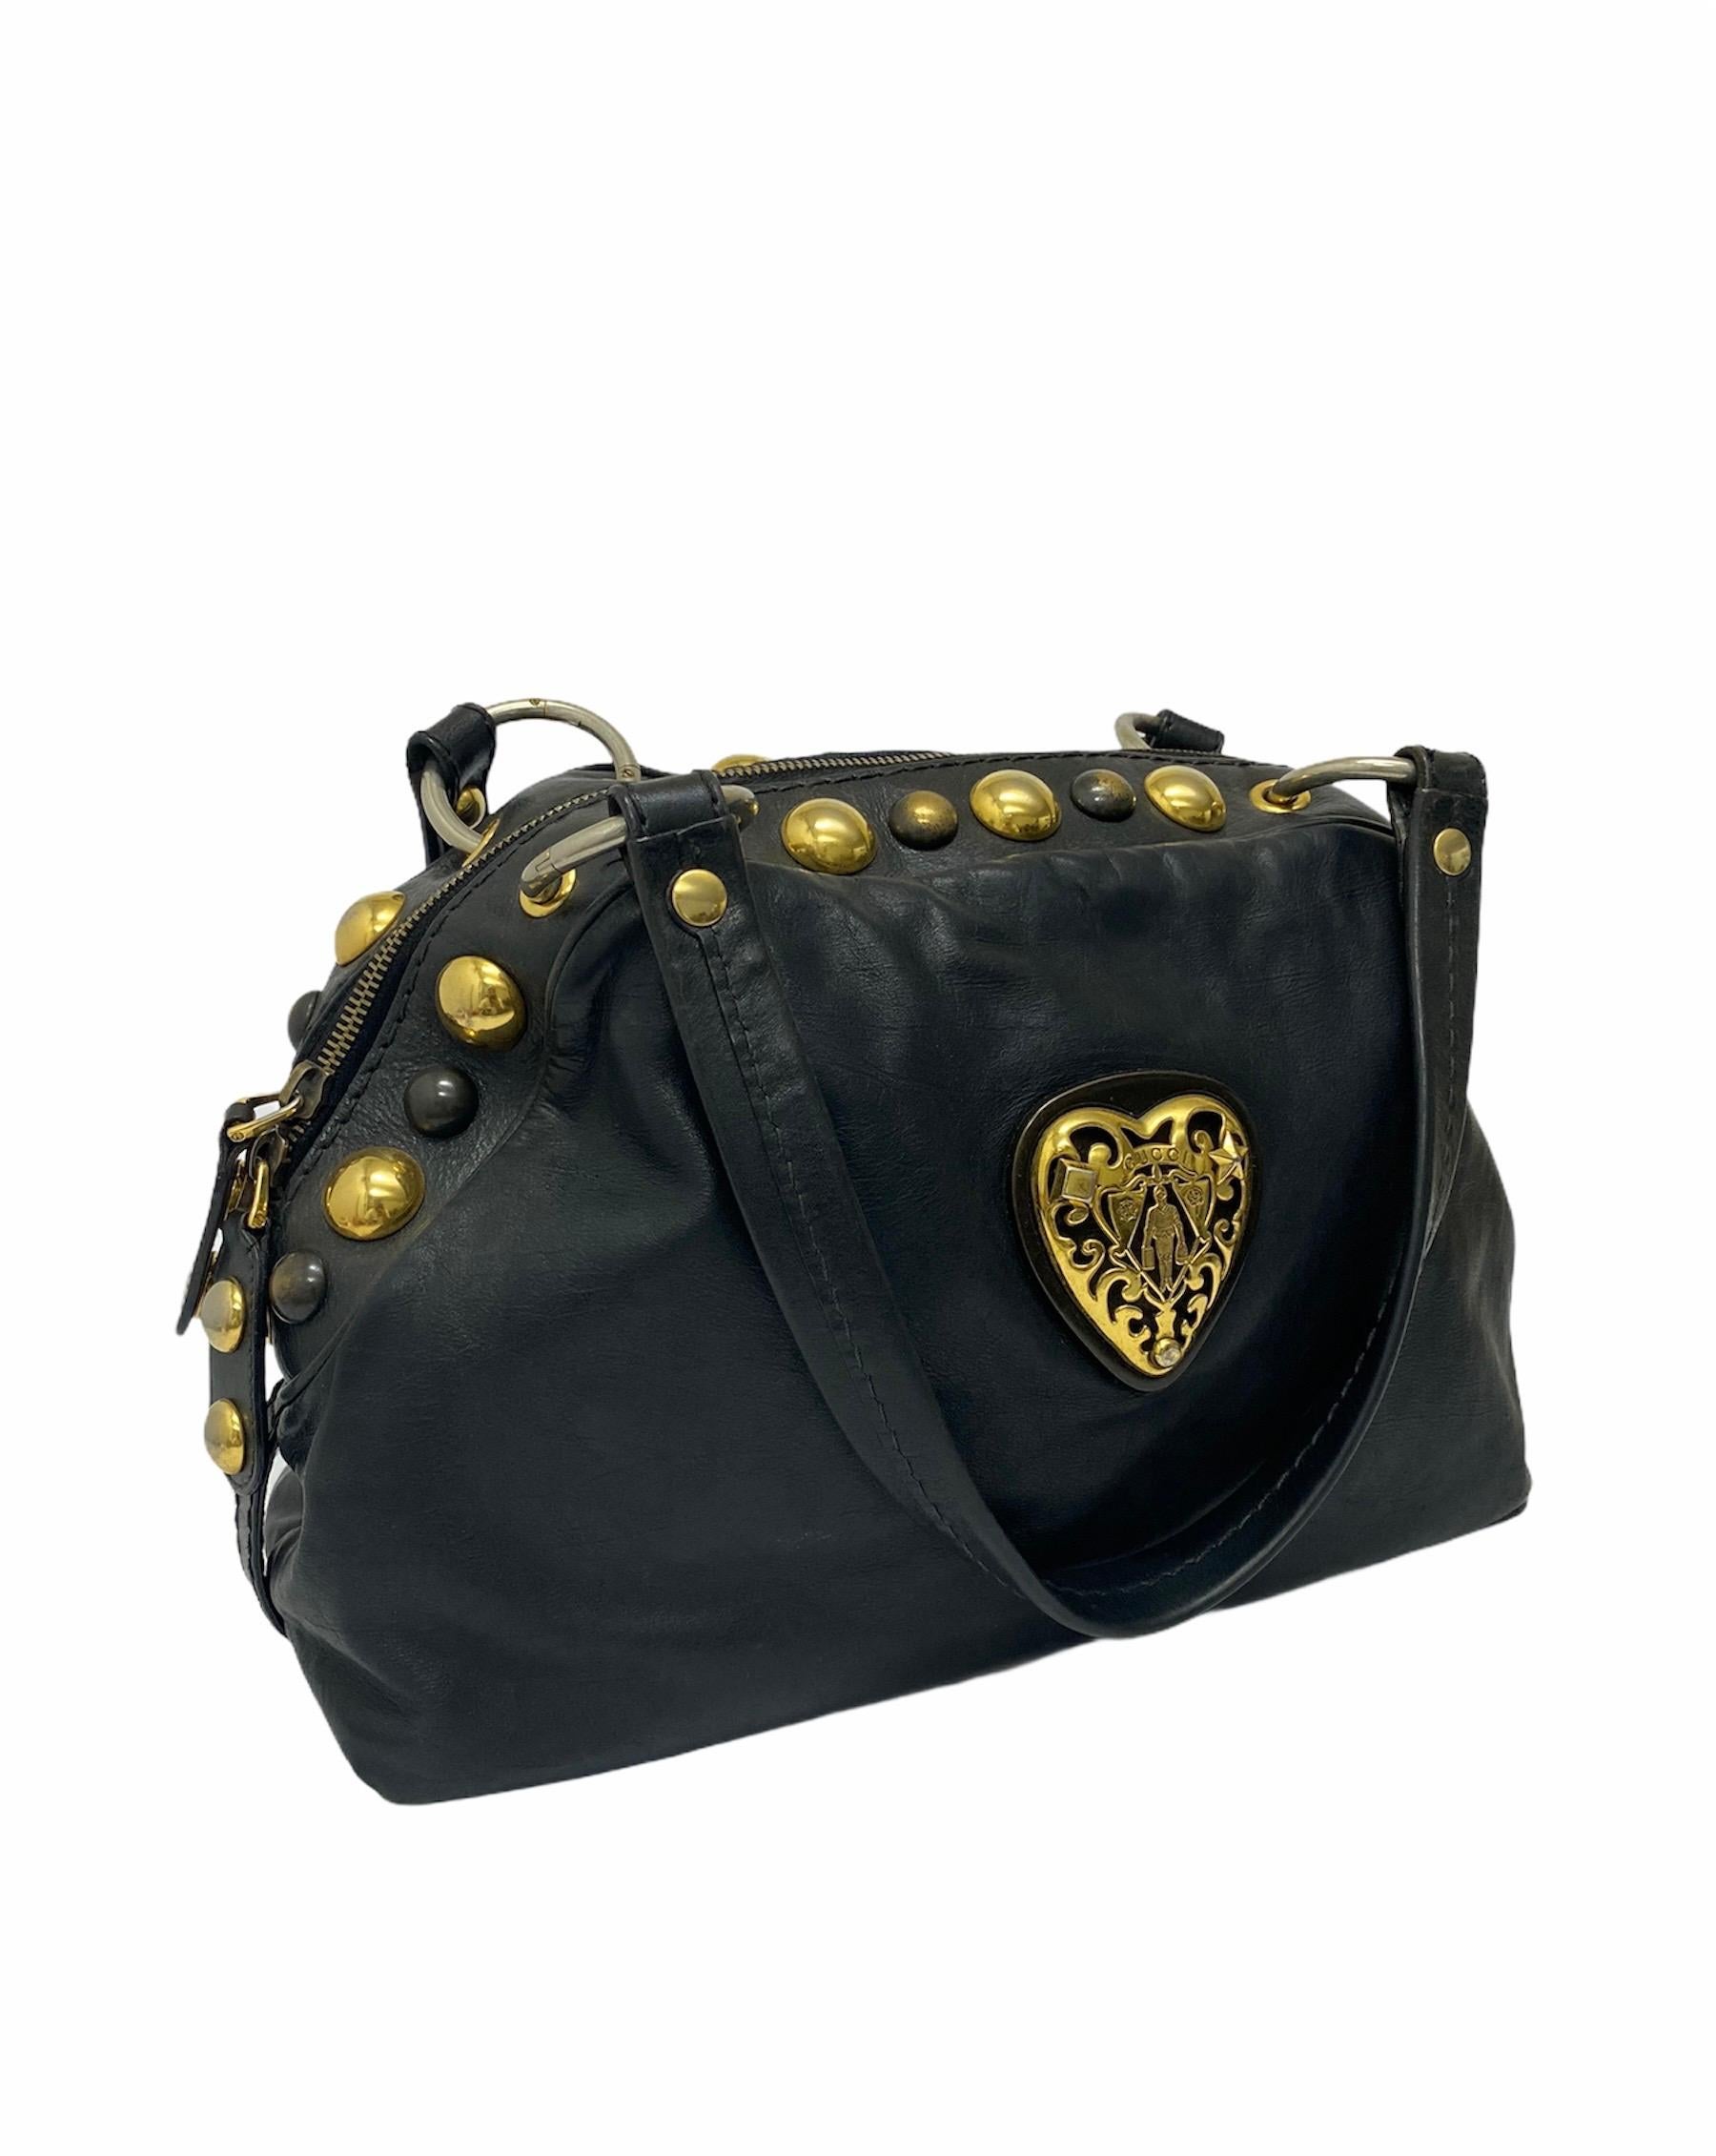 Gucci handbag Hysteria line made of black leather with golden hardware. Enriched with studs and a heart on the front.

Zip closure, internally large enough. Equipped with double leather handle to also wear it on the shoulder.

It is in good